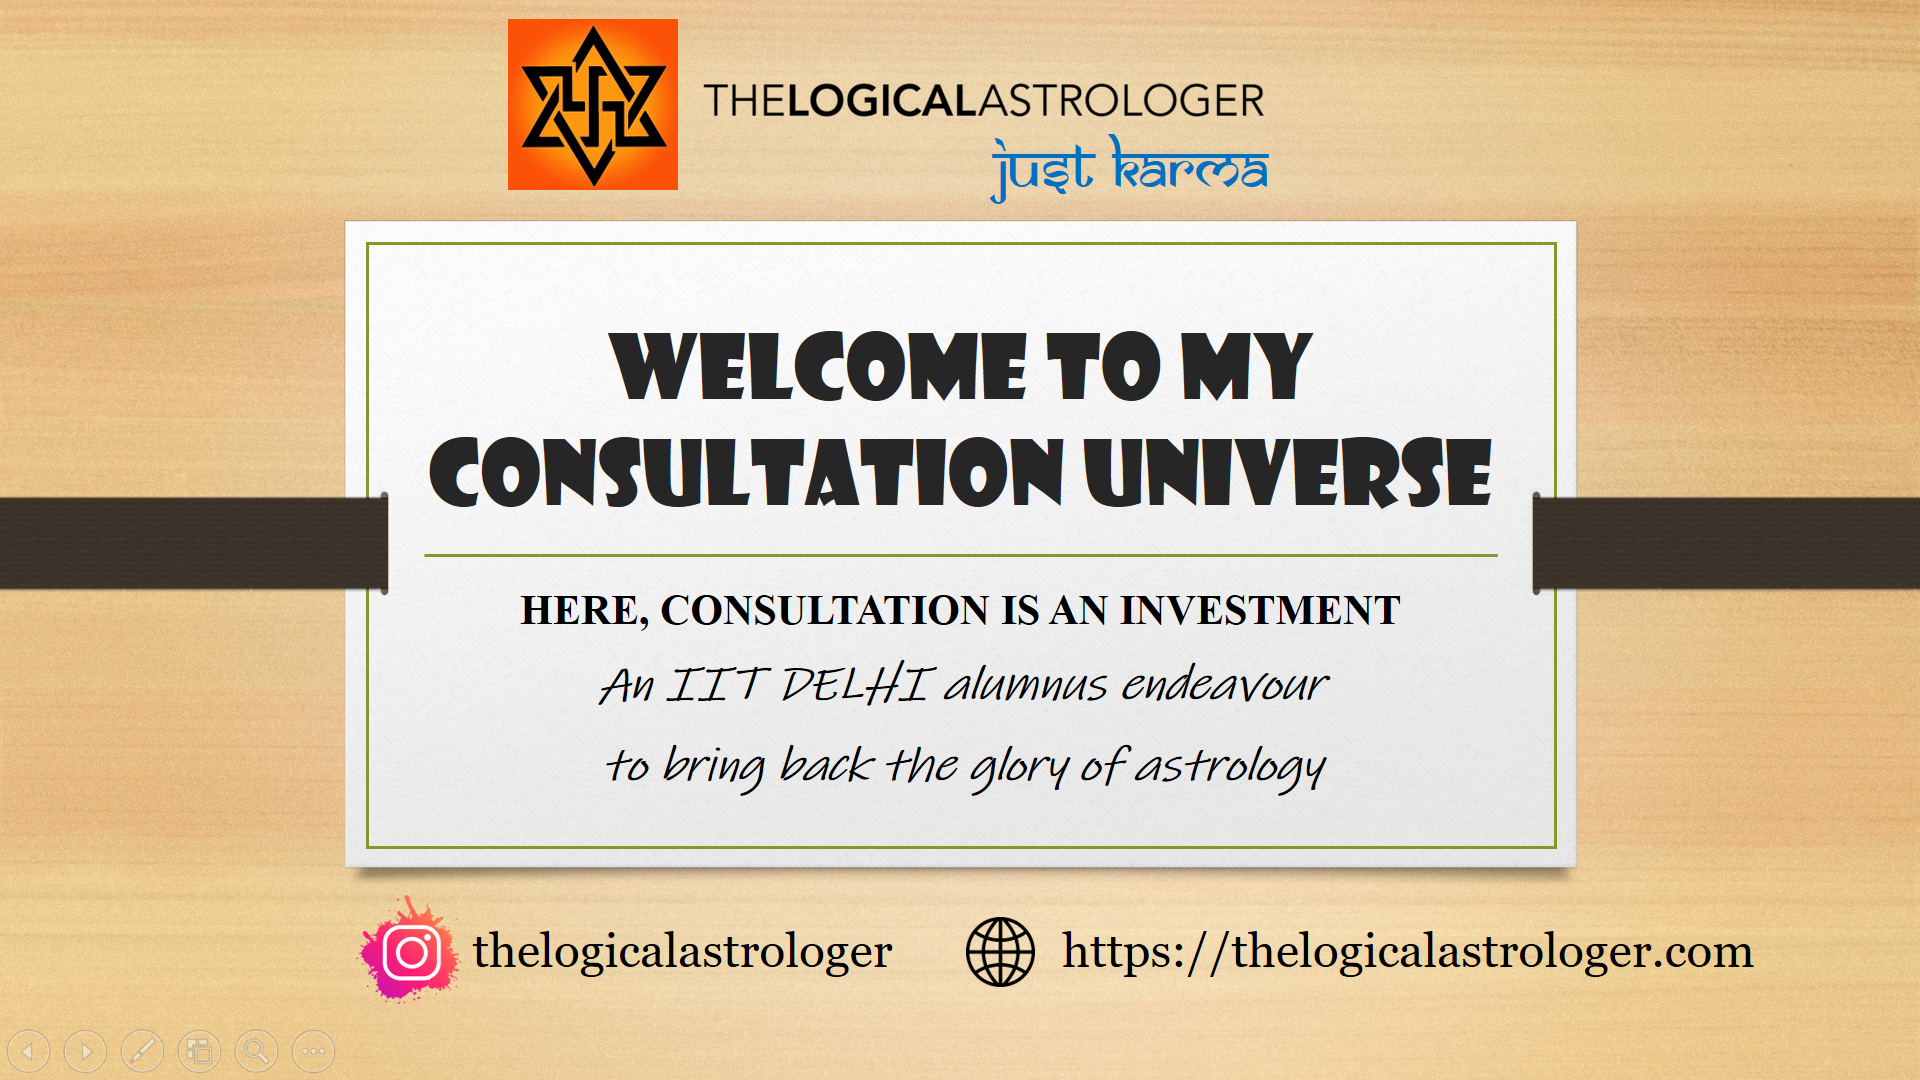 THE LOGICAL ASTROLOGER CONSULTATION